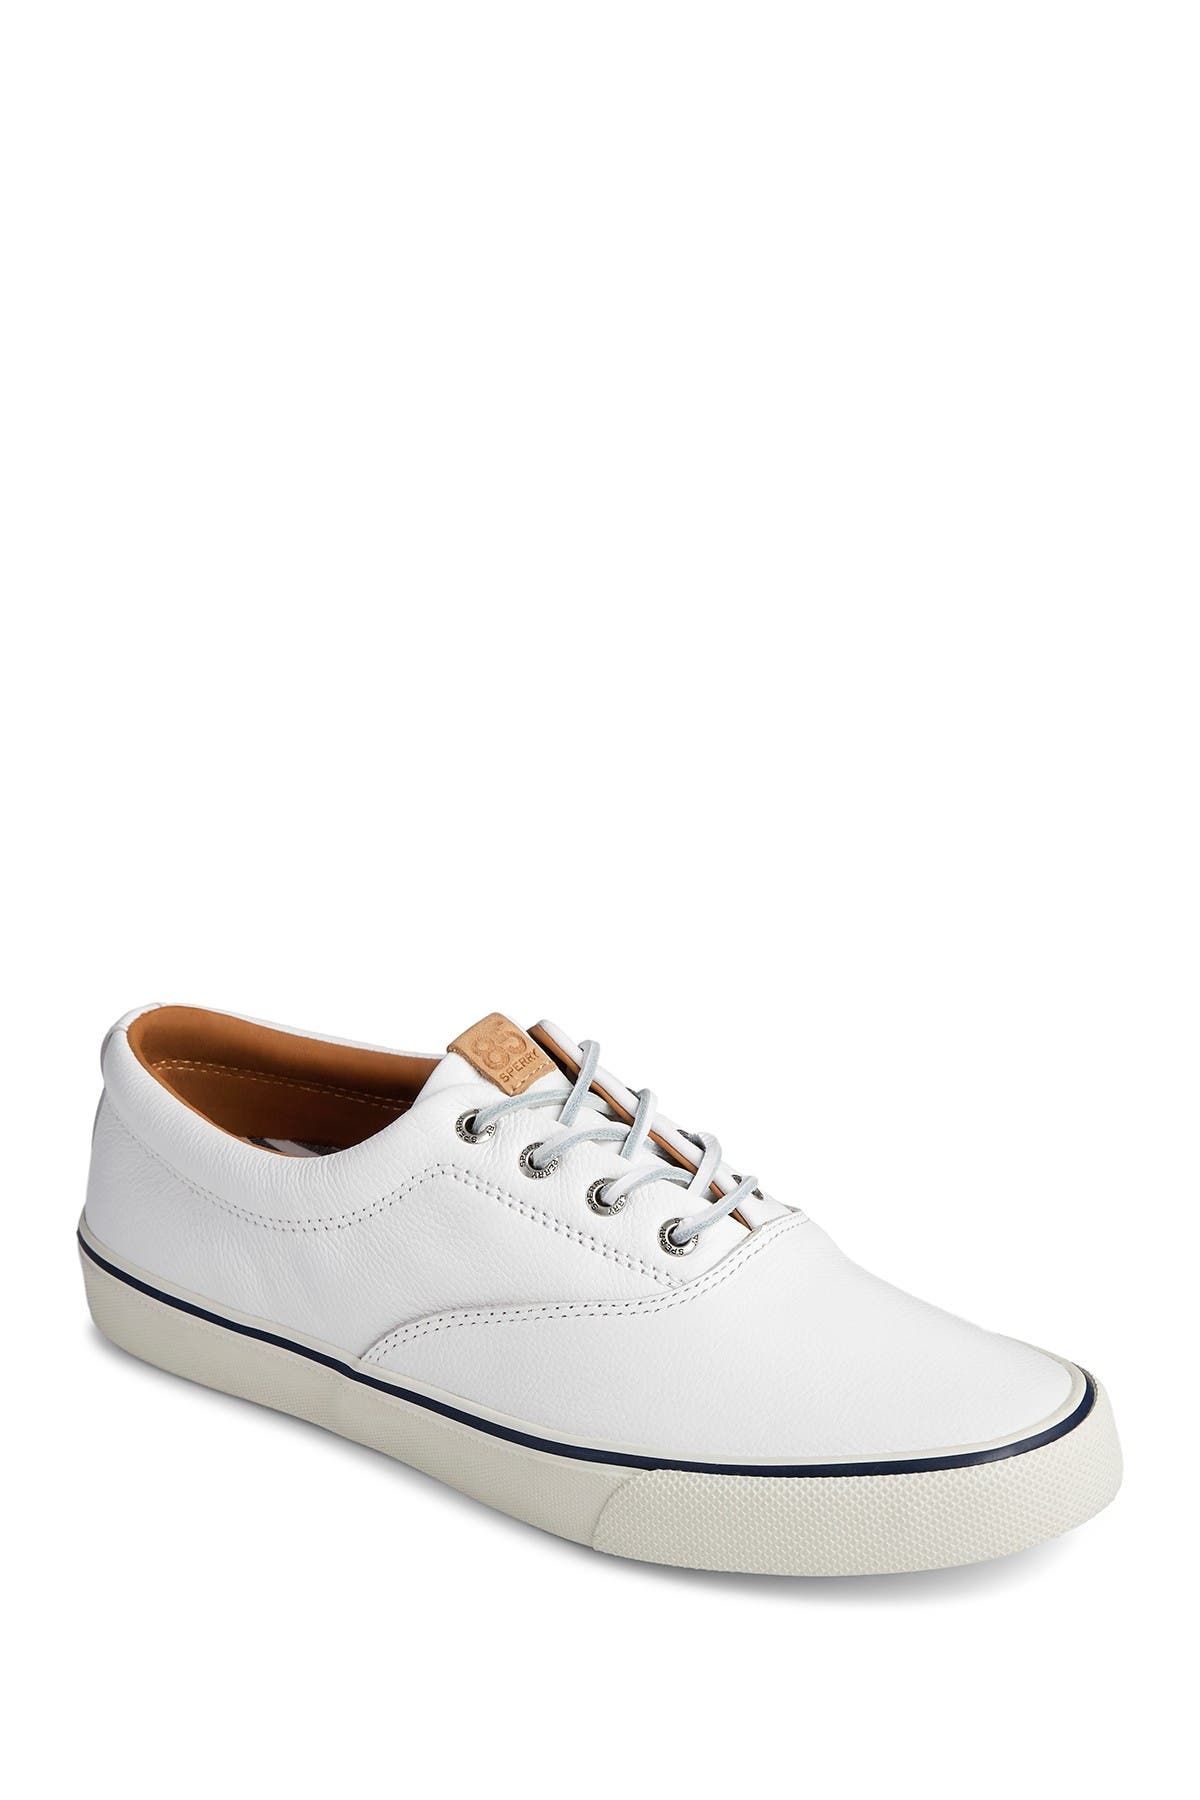 sperry striper lace up leather sneaker